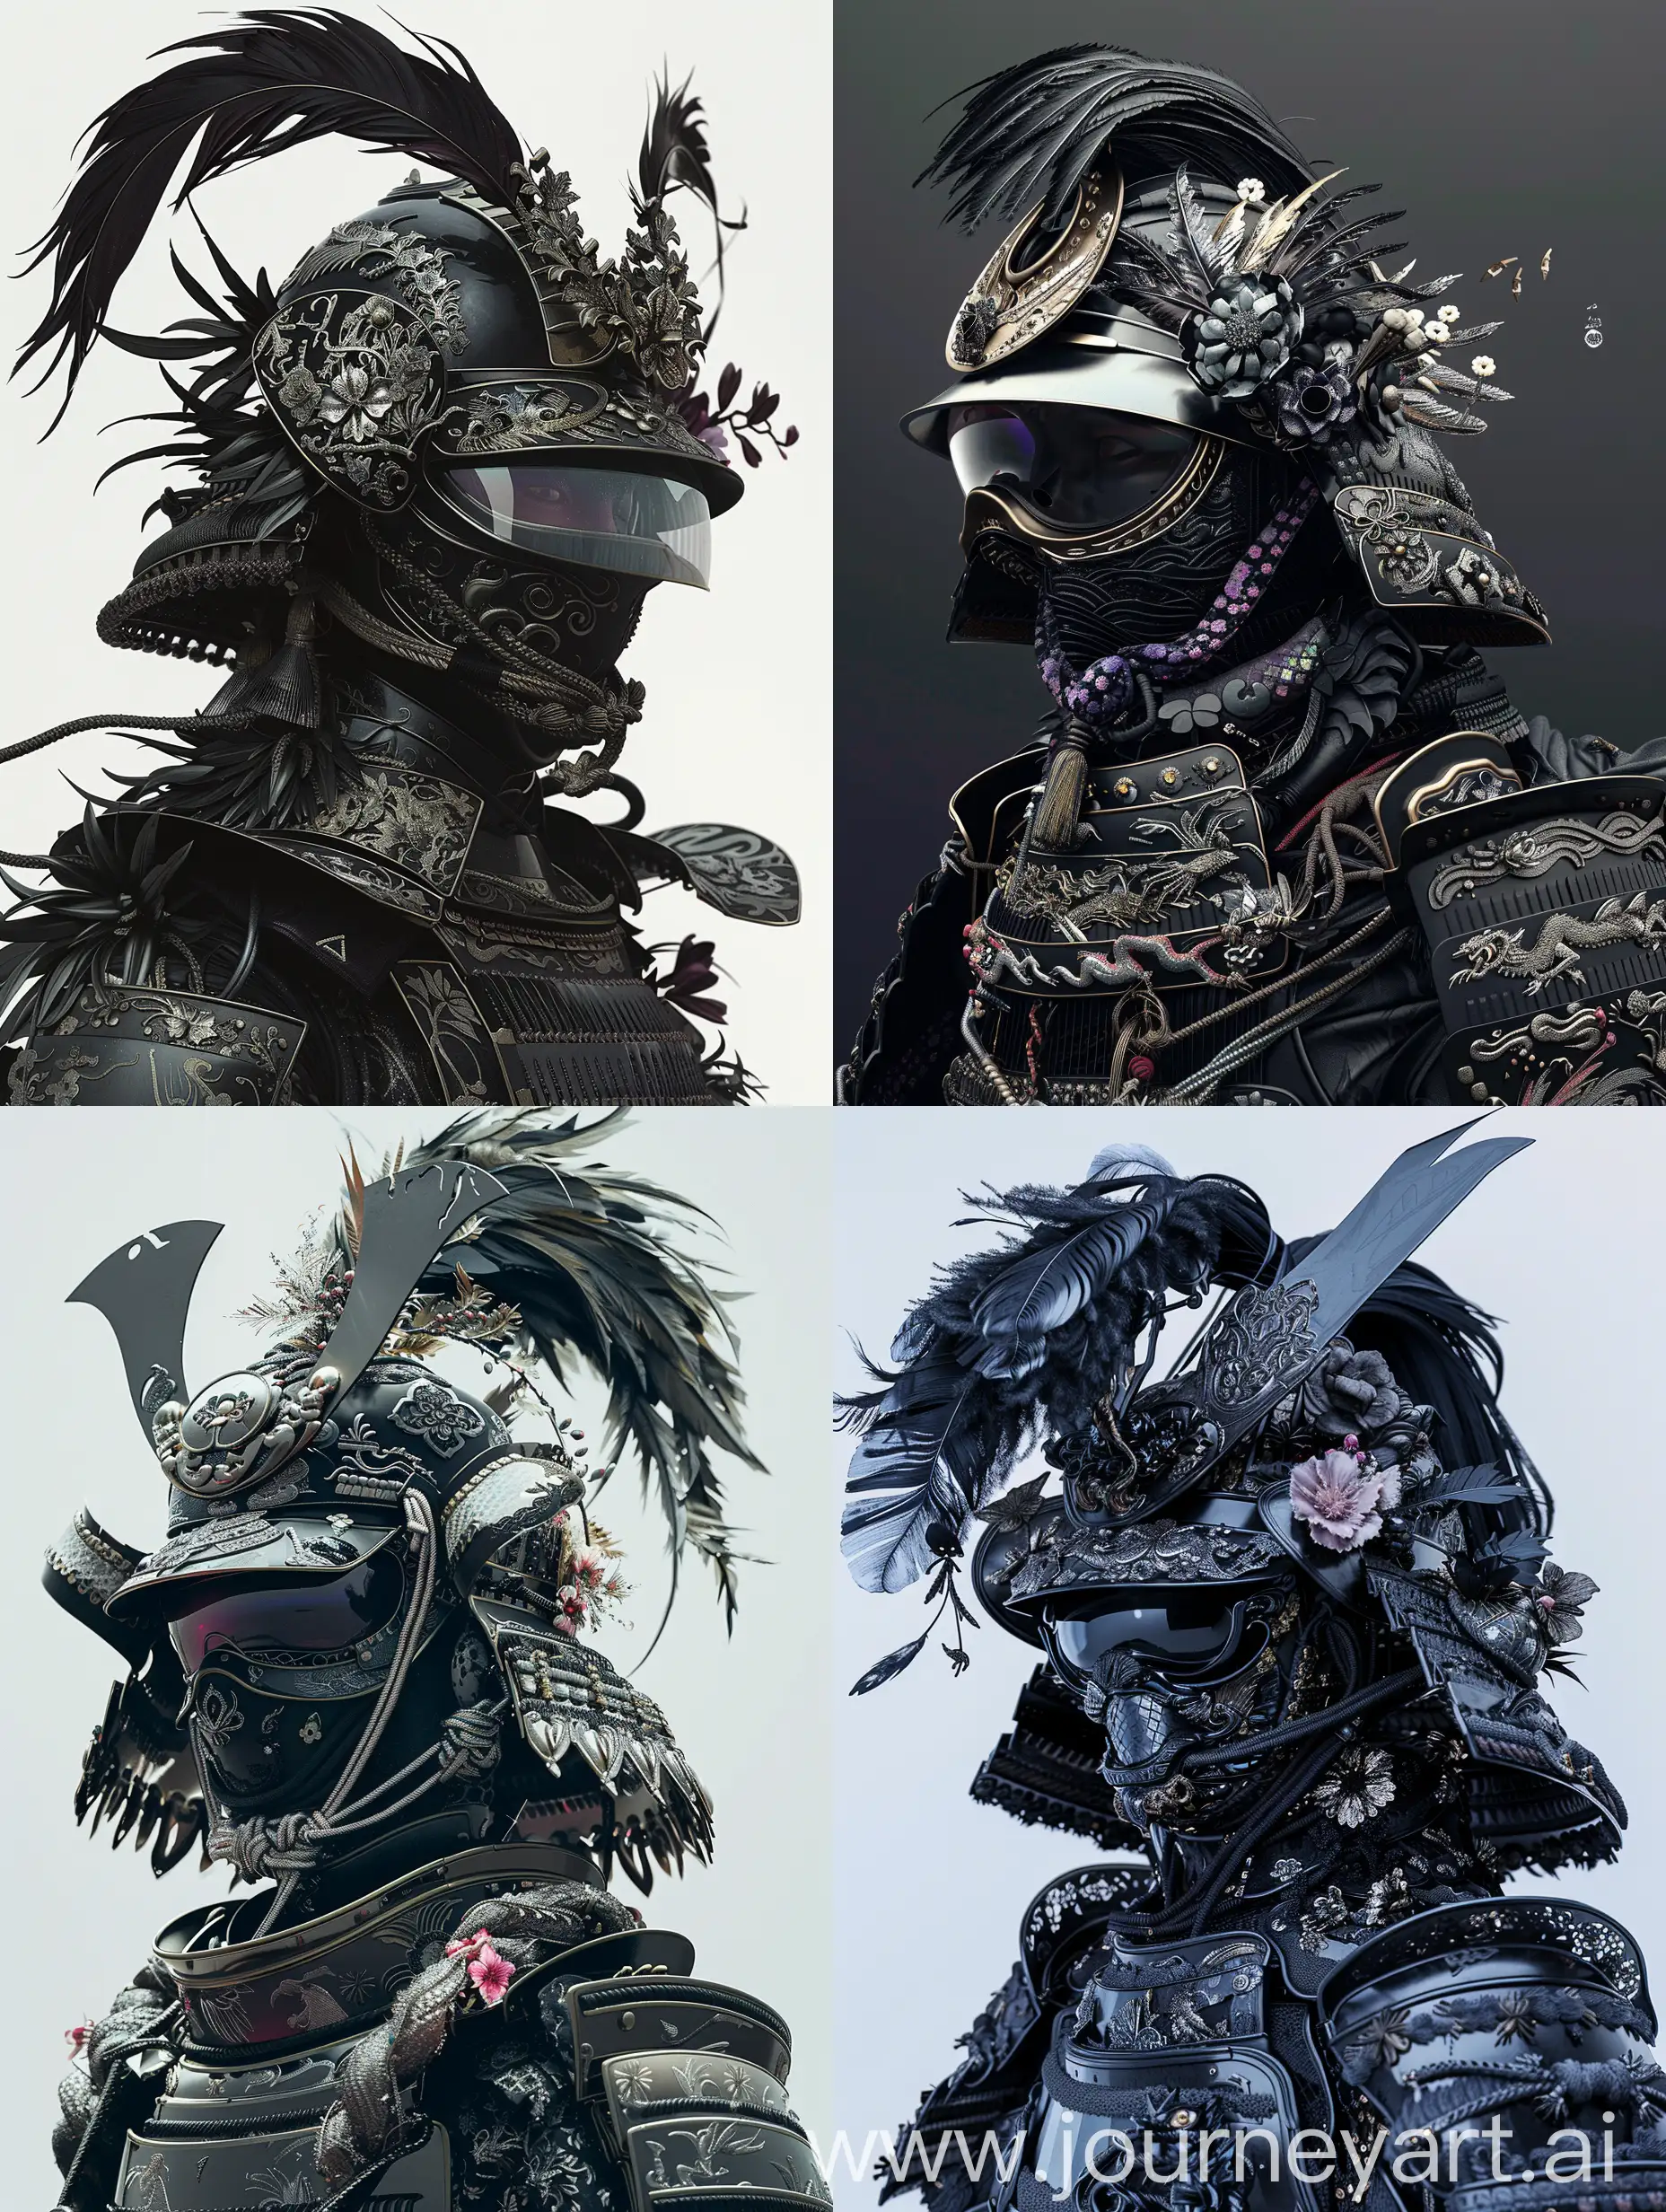 Elaborate-Samurai-Warrior-in-Ornate-Black-Armor-with-Floral-and-Dragon-Motifs